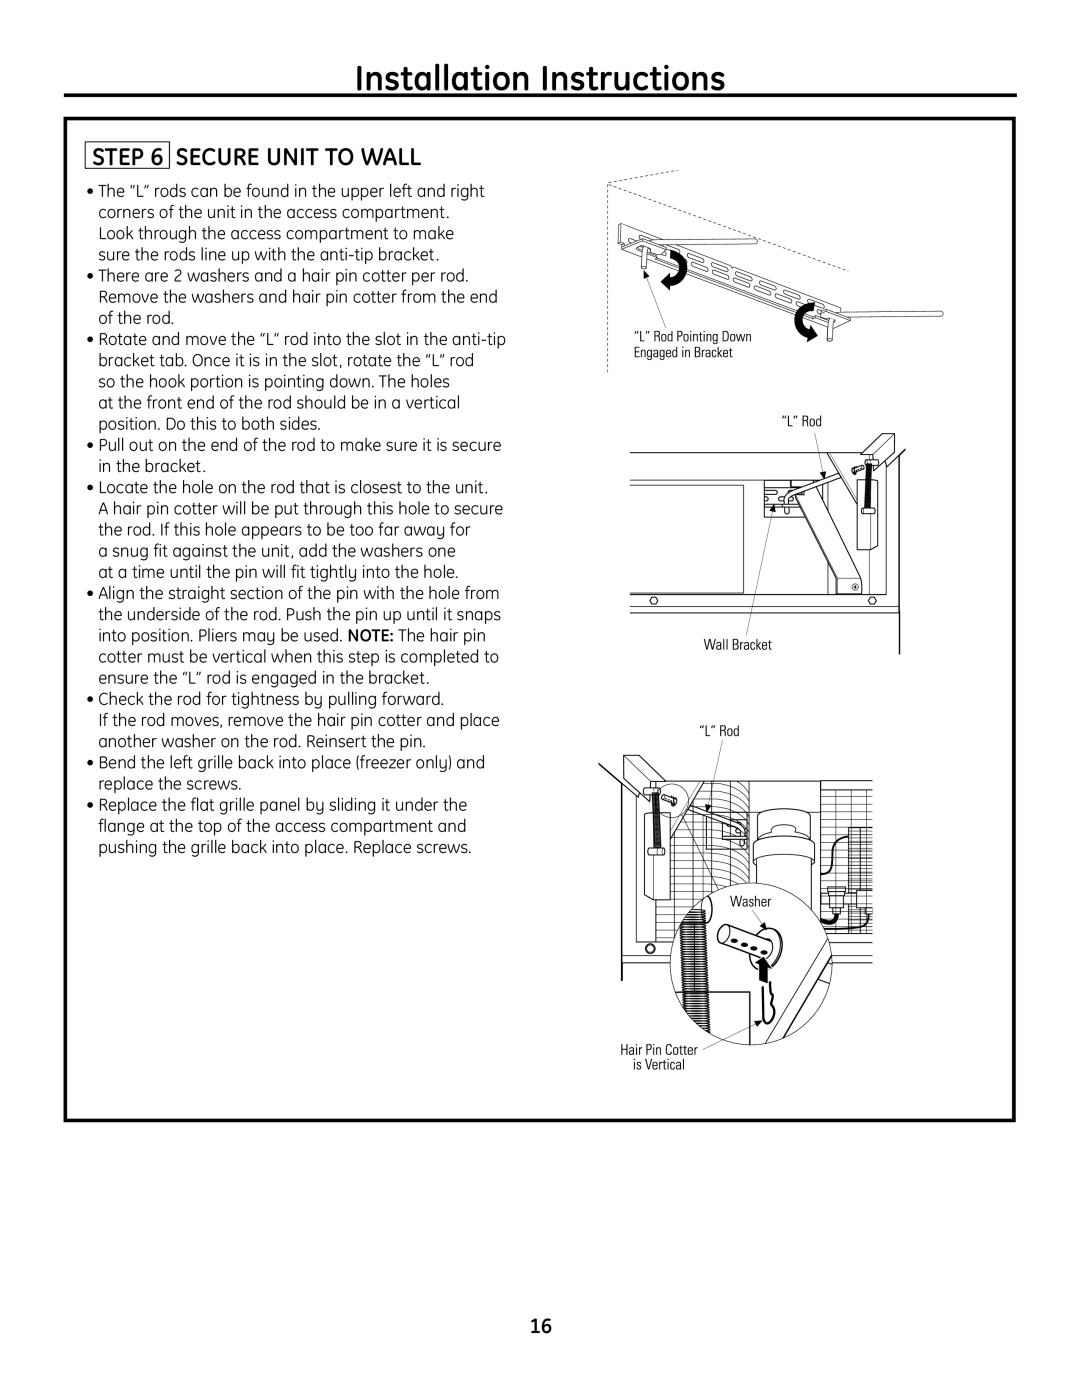 GE Monogram Built-In All-Refrigerator/Freezer installation instructions Secure Unit To Wall, Installation Instructions 